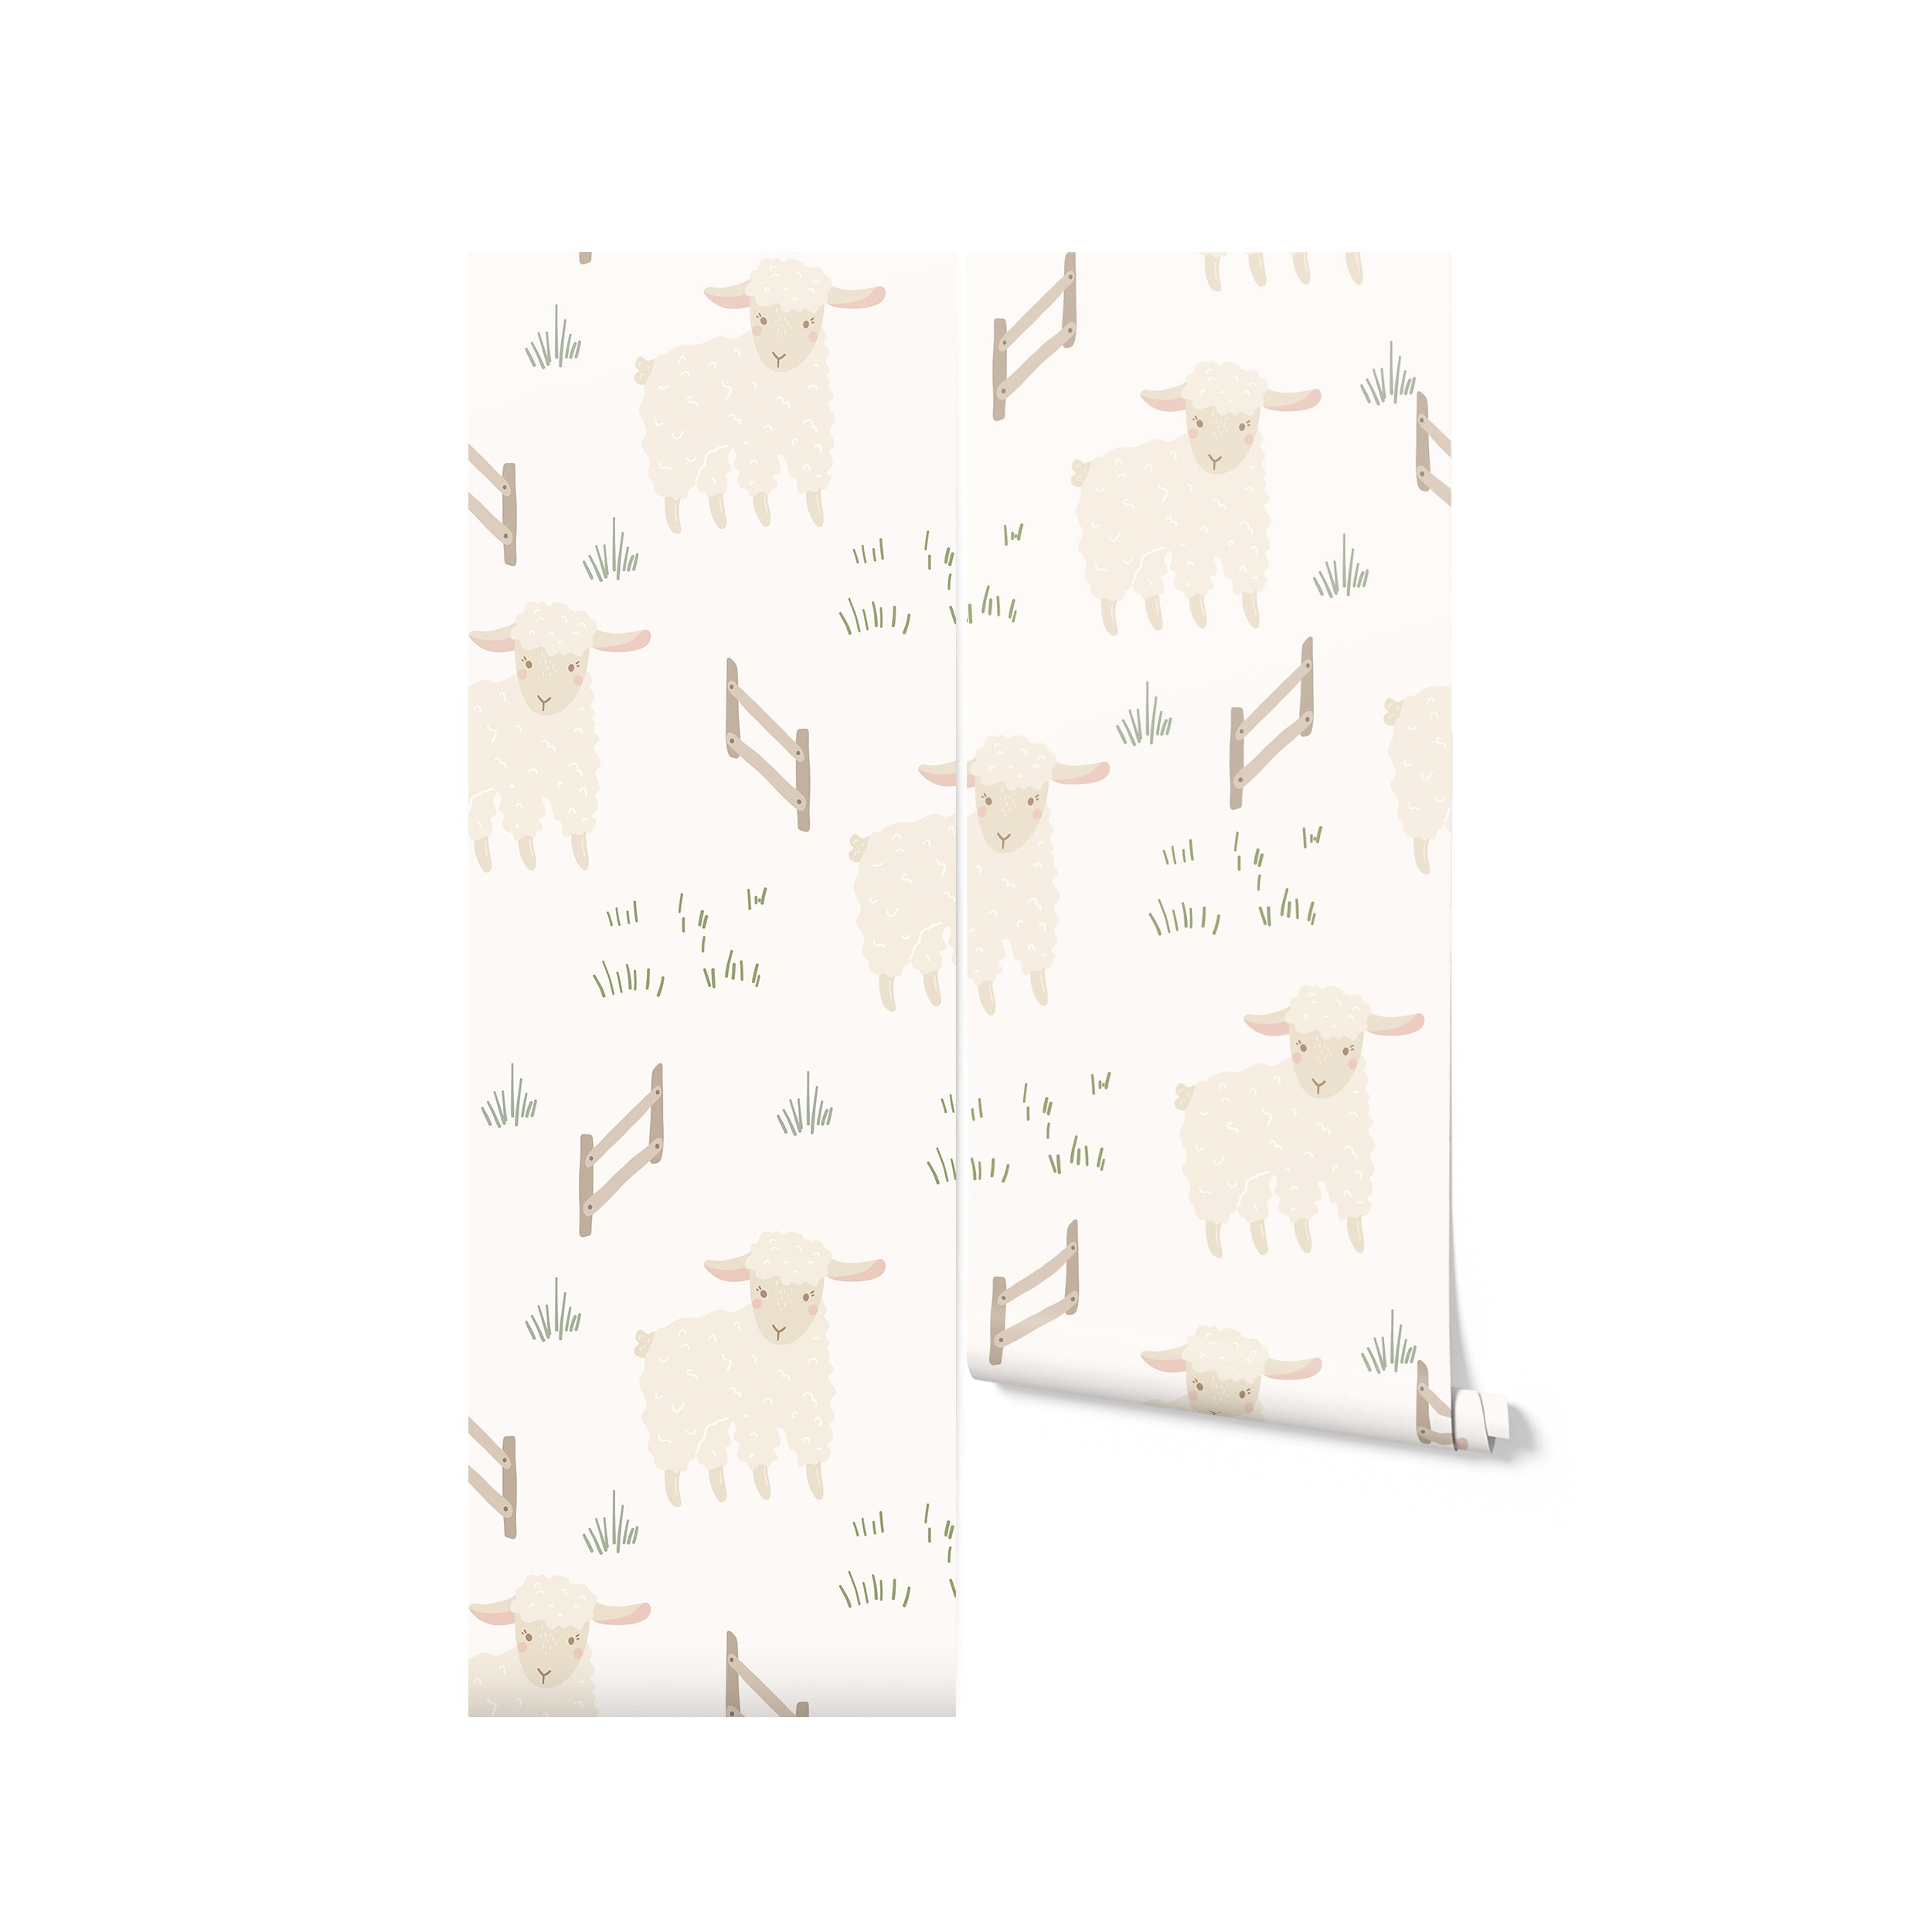 Roll of children's wallpaper with a delightful design of fluffy white sheep and rustic wooden fences on a creamy background, interspersed with small tufts of green grass, perfect for a nursery or young child's bedroom